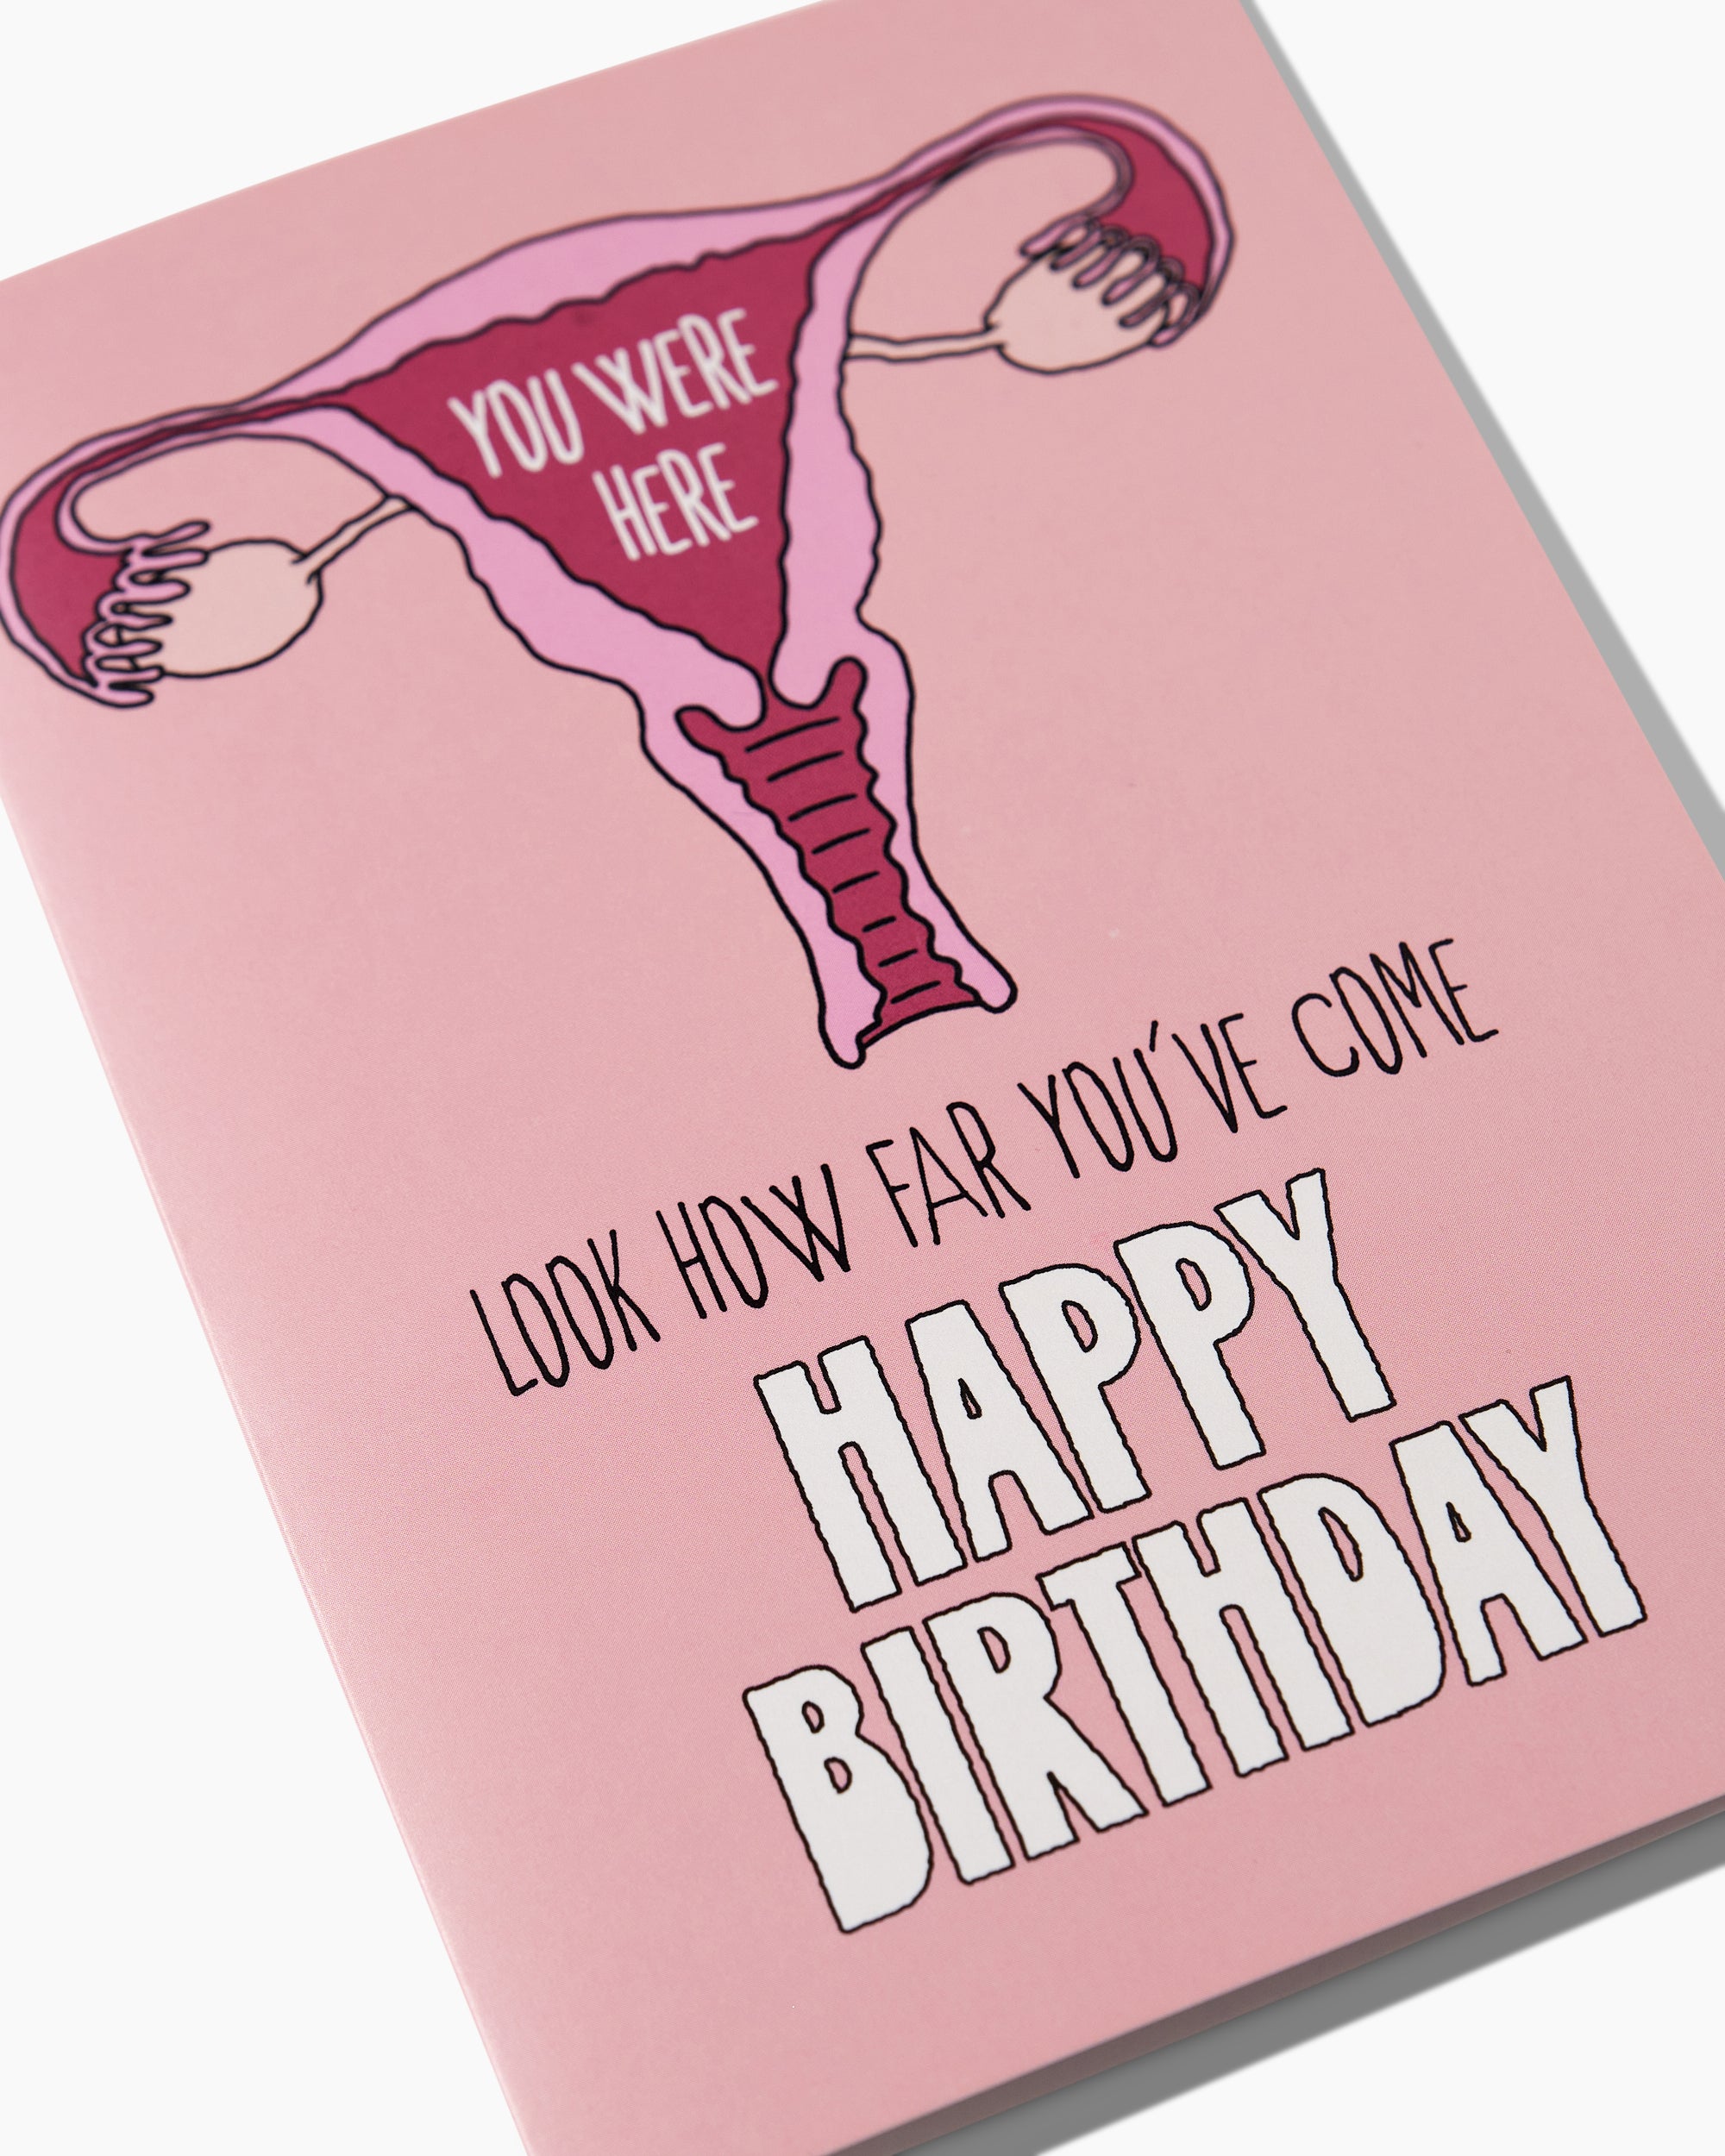 Look How Far You've Come Greeting Card Australia Online